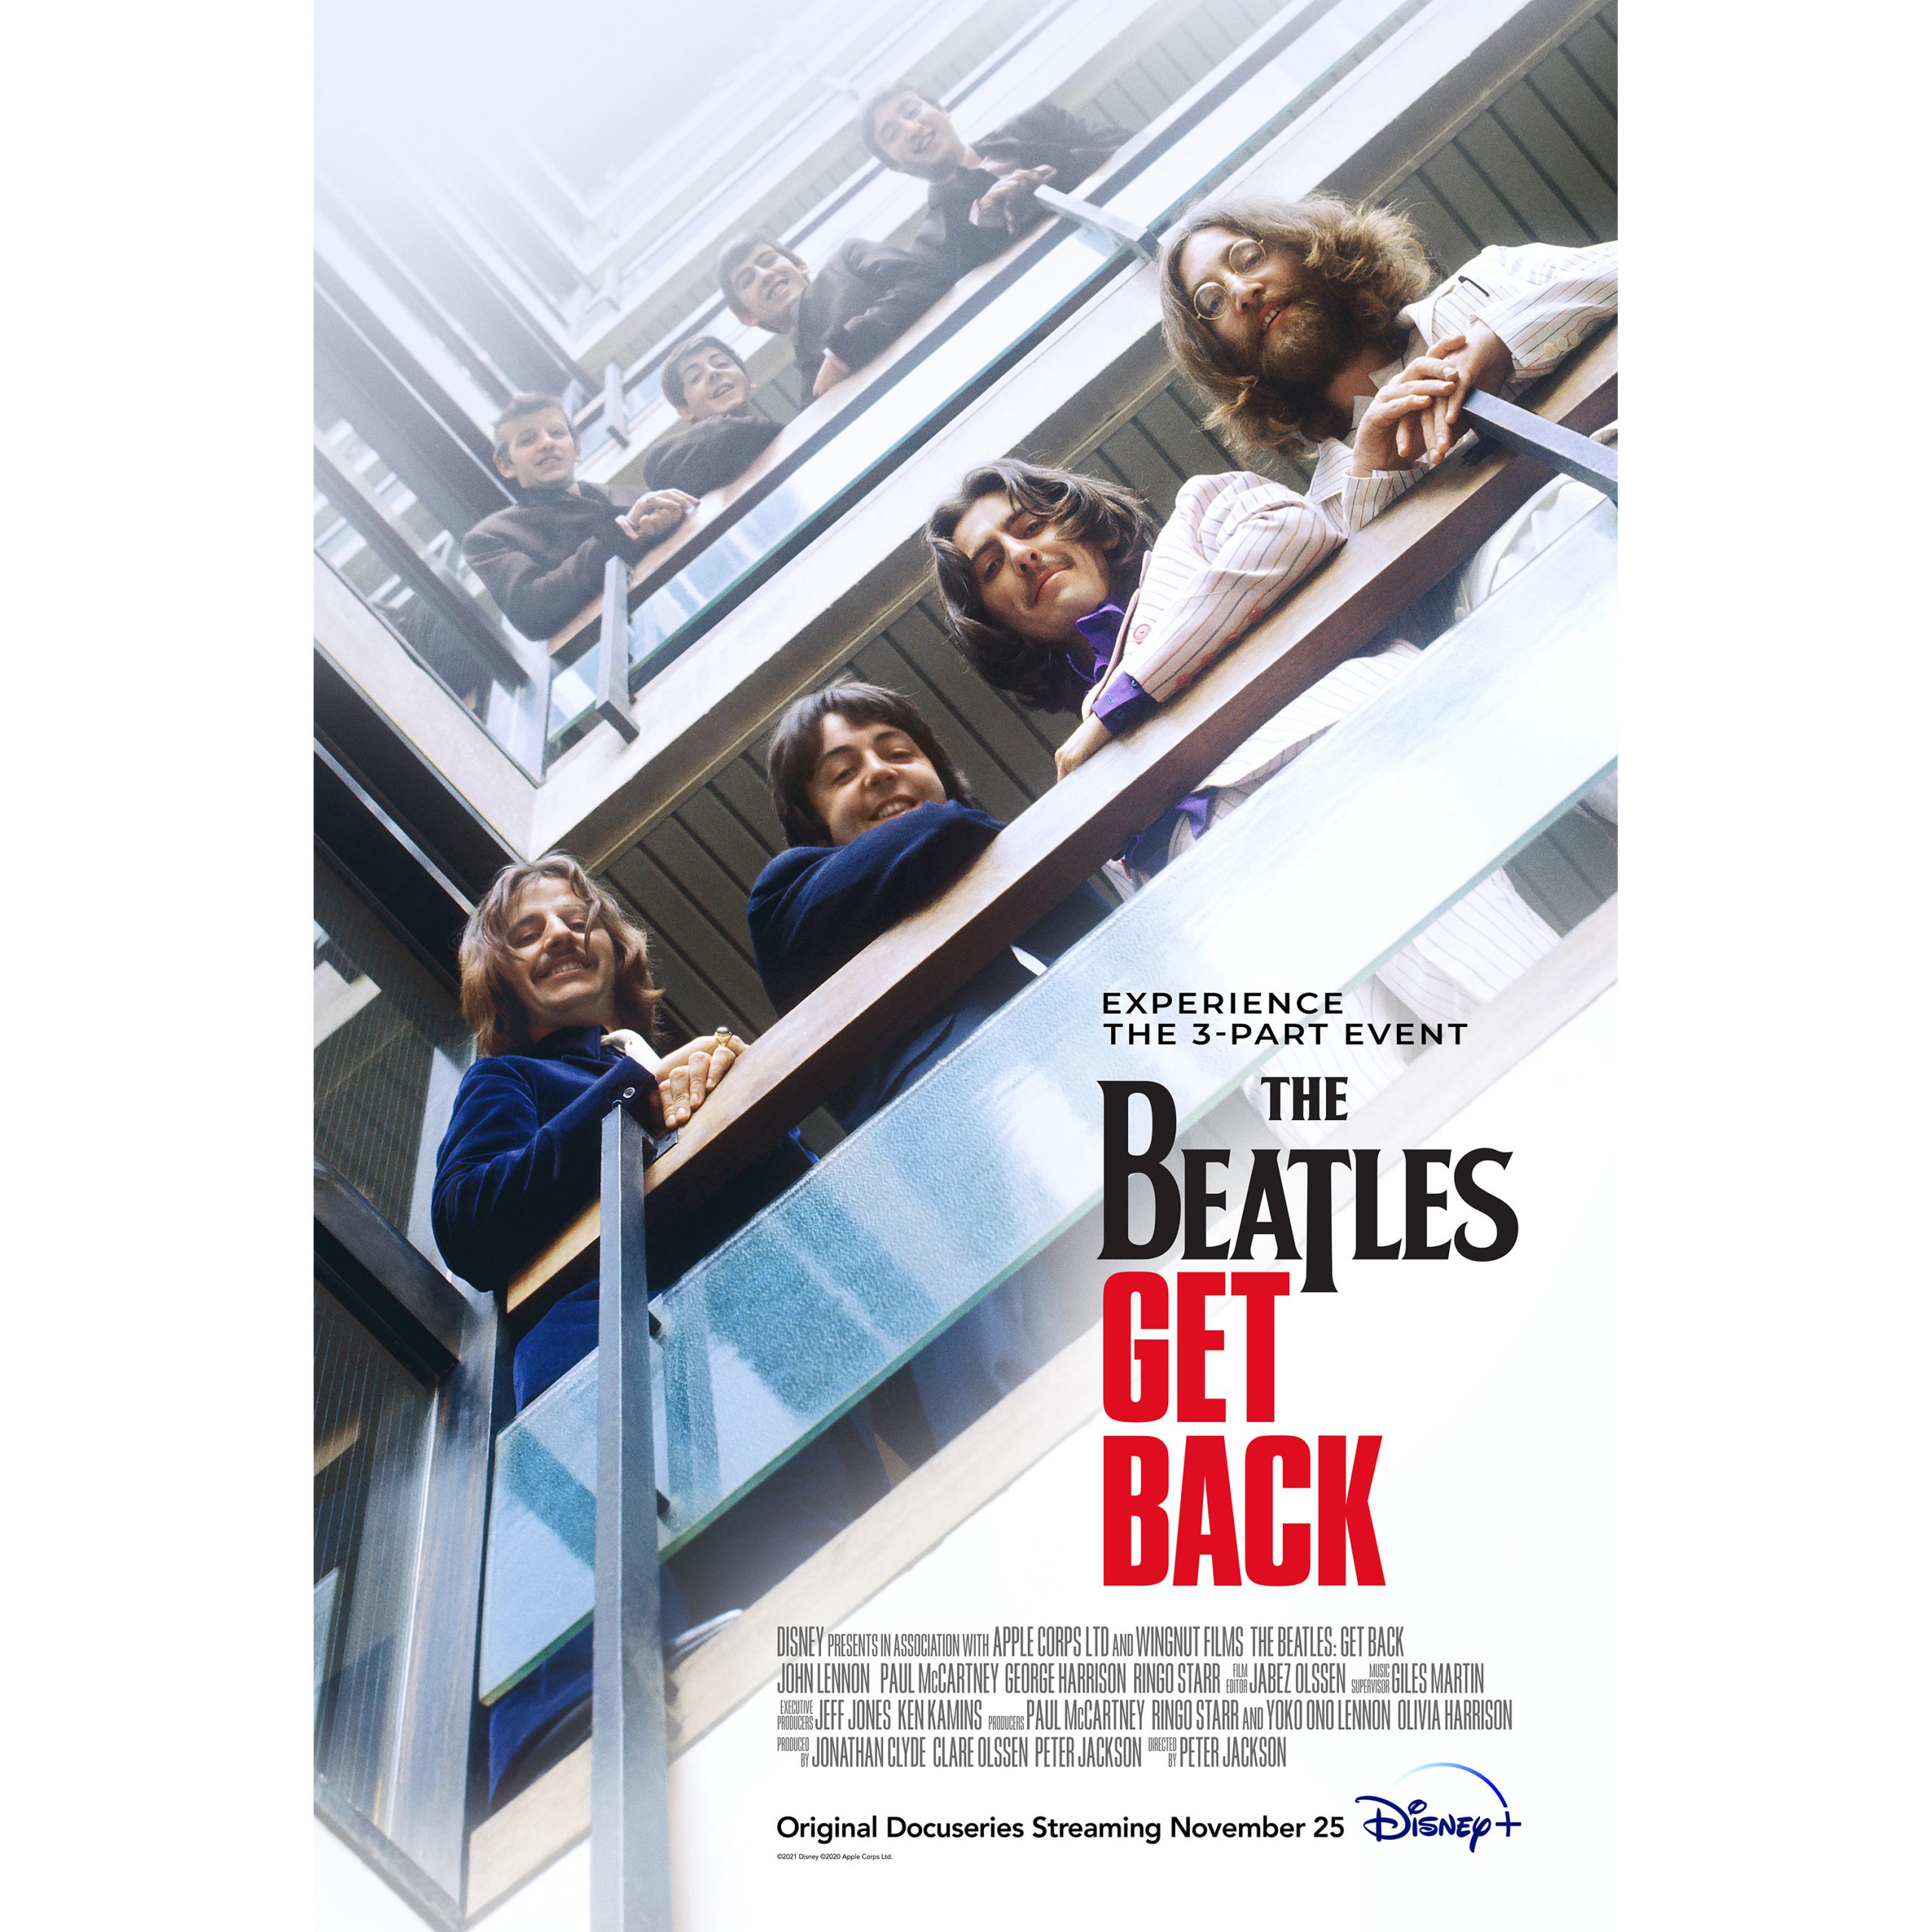 The Beatles: Get Back” released on Blu-Ray / DVD in the US - The 